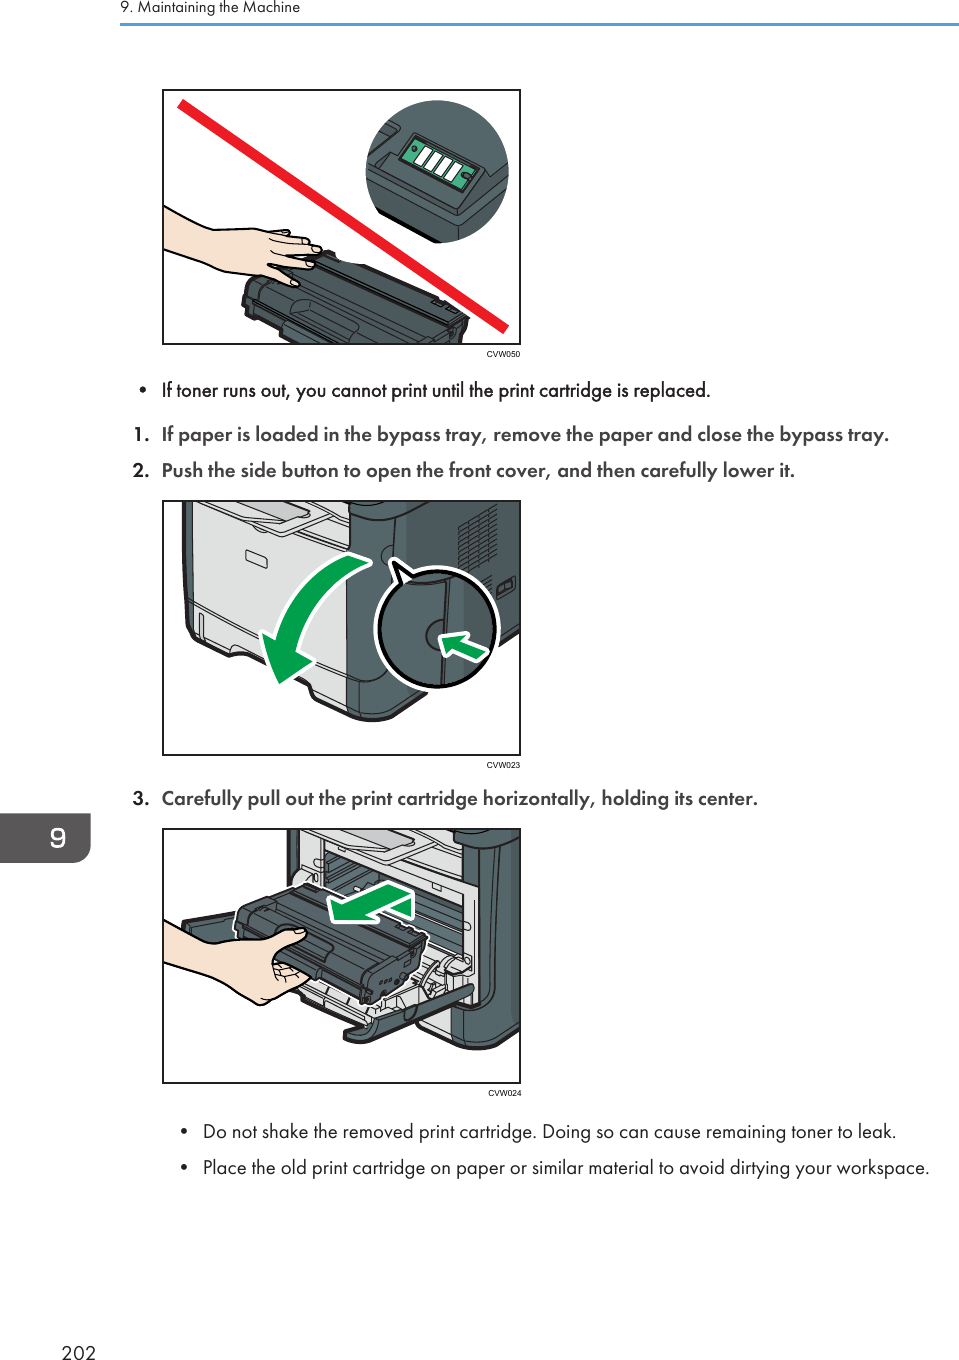 CVW050• If toner runs out, you cannot print until the print cartridge is replaced.1. If paper is loaded in the bypass tray, remove the paper and close the bypass tray.2. Push the side button to open the front cover, and then carefully lower it.CVW0233. Carefully pull out the print cartridge horizontally, holding its center.CVW024• Do not shake the removed print cartridge. Doing so can cause remaining toner to leak.•Place the old print cartridge on paper or similar material to avoid dirtying your workspace.9. Maintaining the Machine202